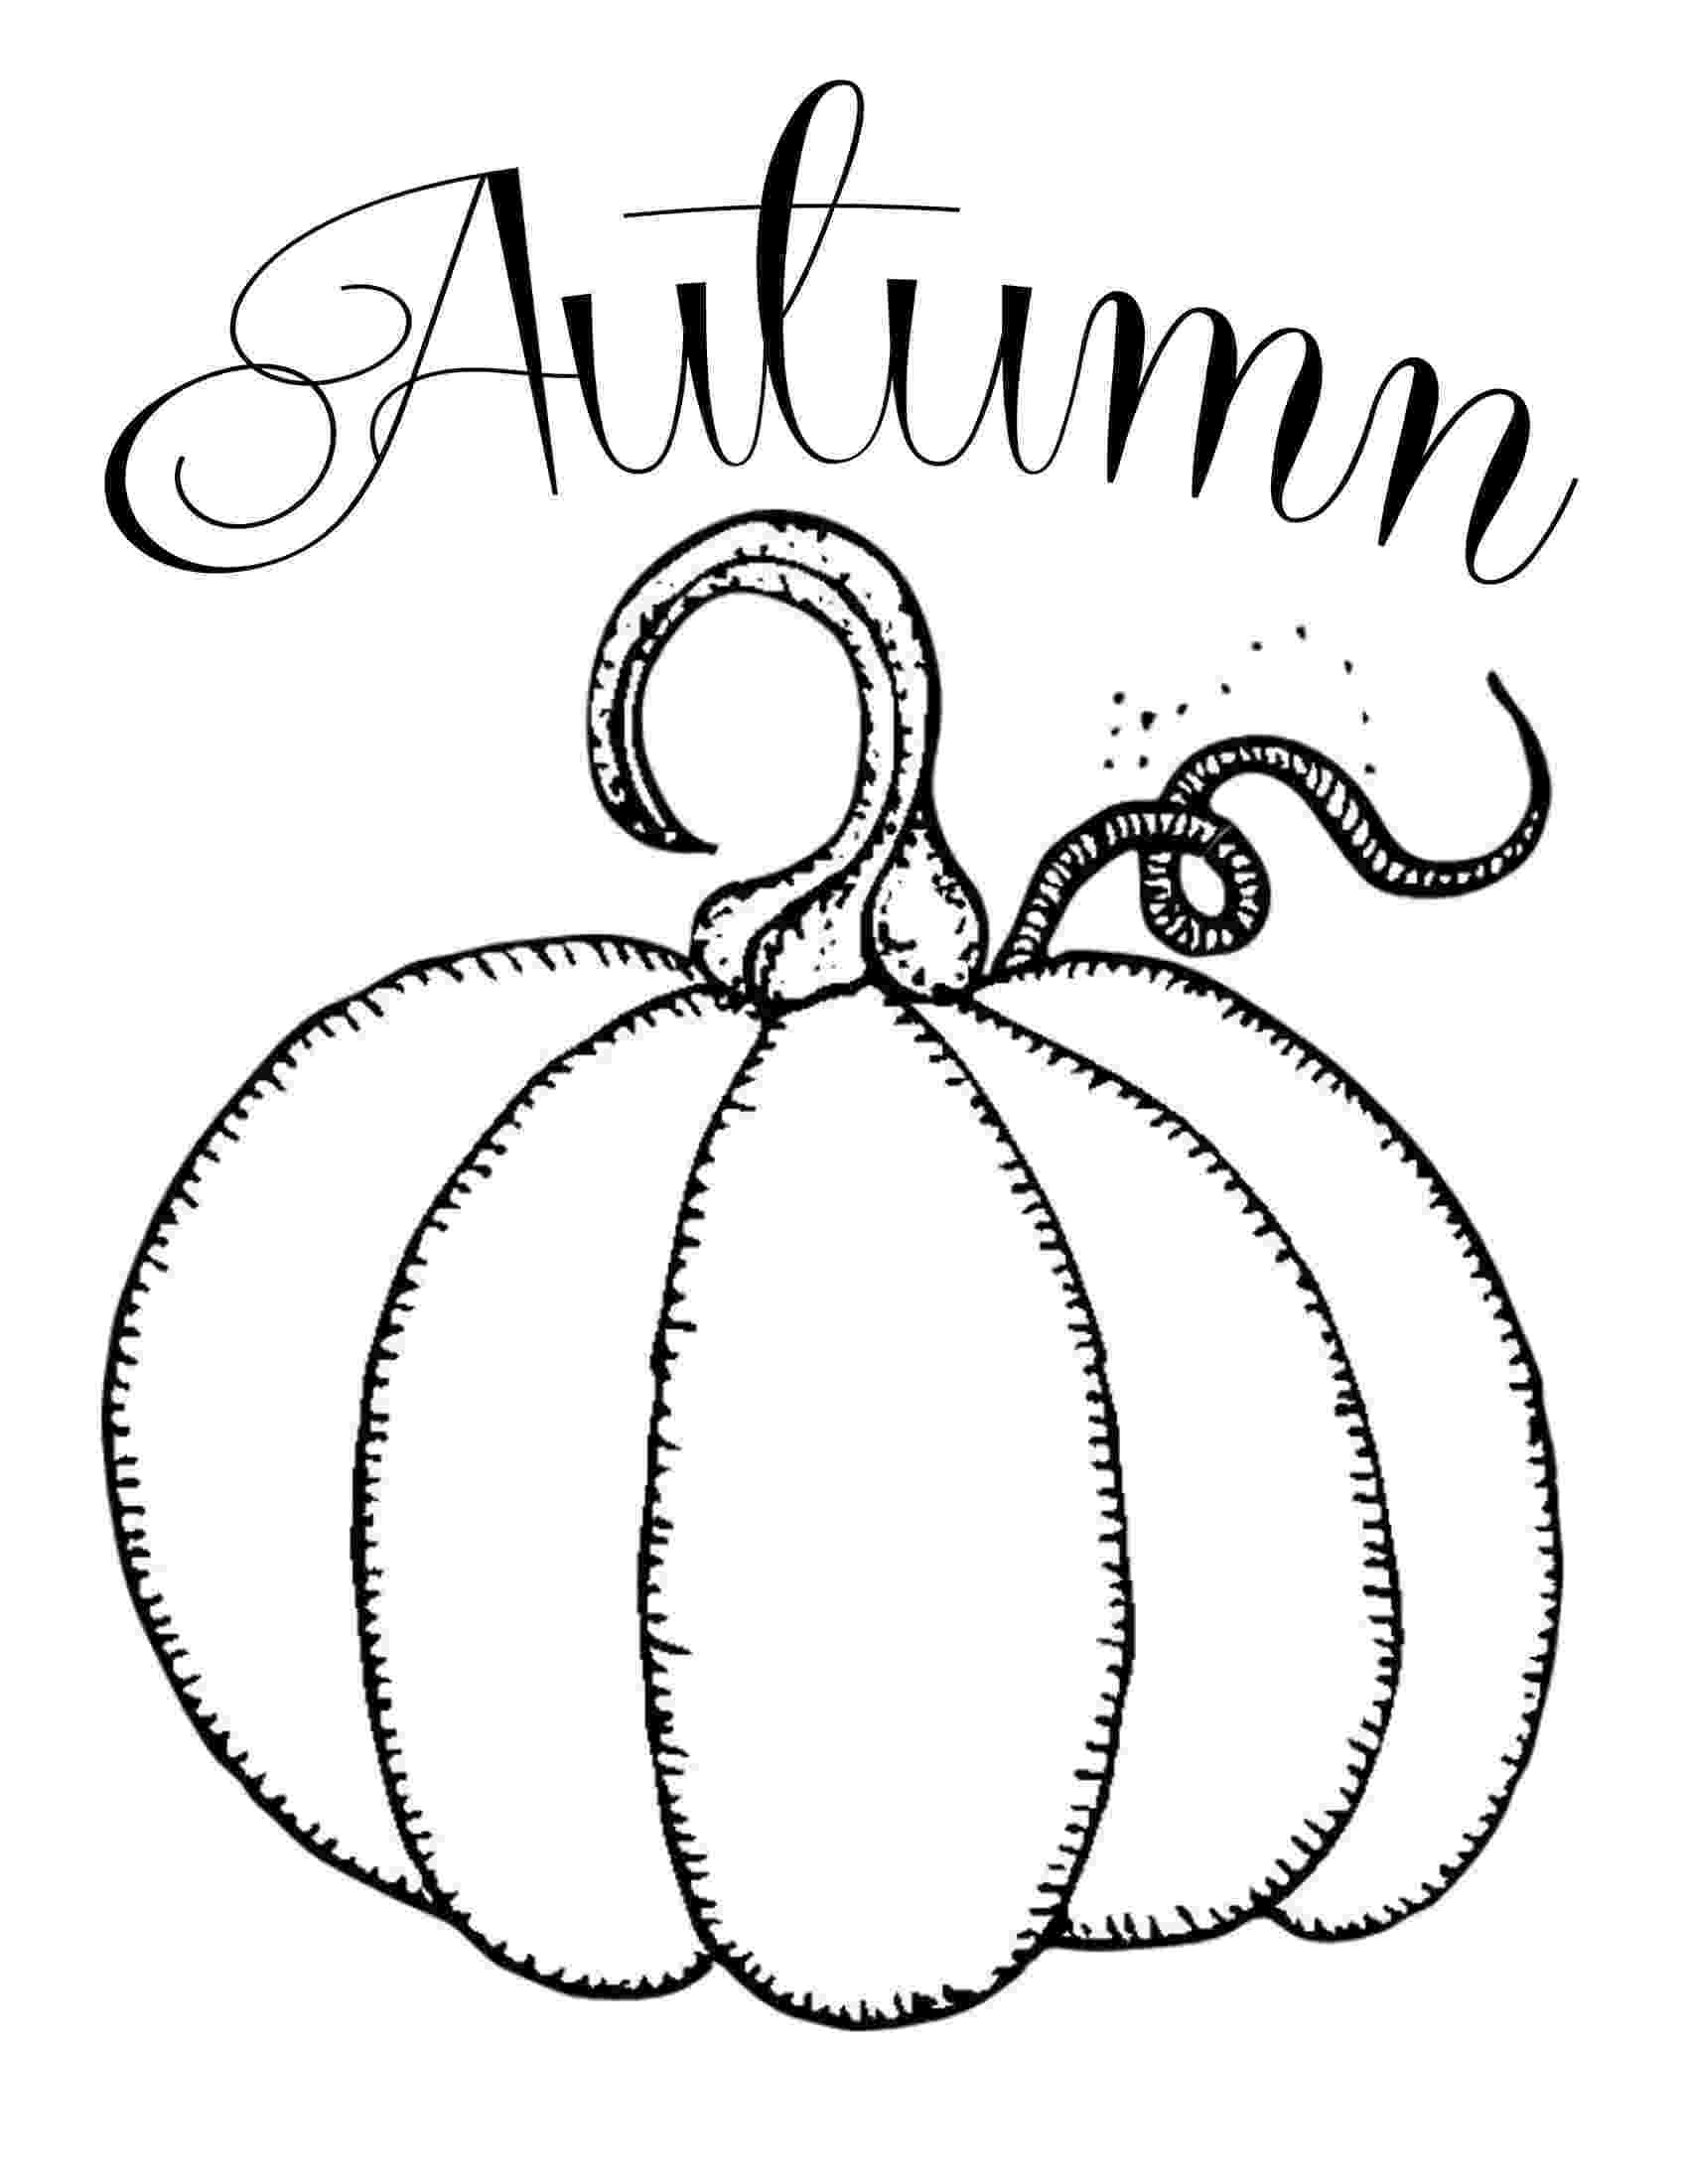 pumpkin pictures to print free printable pumpkin coloring pages for kids to print pumpkin pictures 